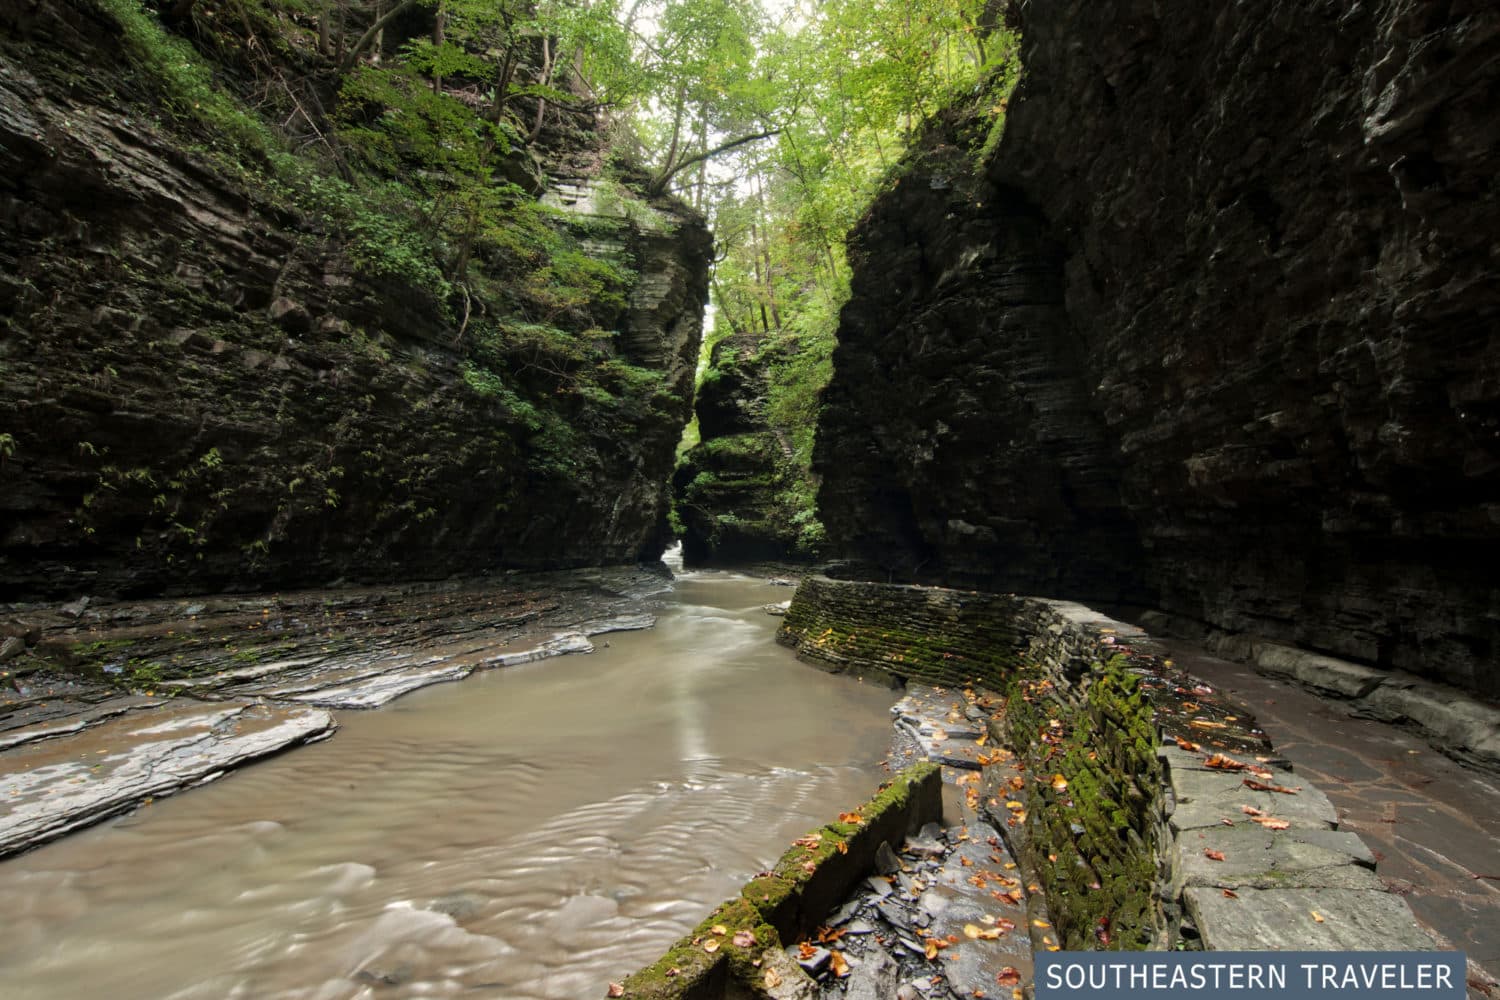 A stone trail runs alongside a river through the gorge at Watkins Glen State Park in New York